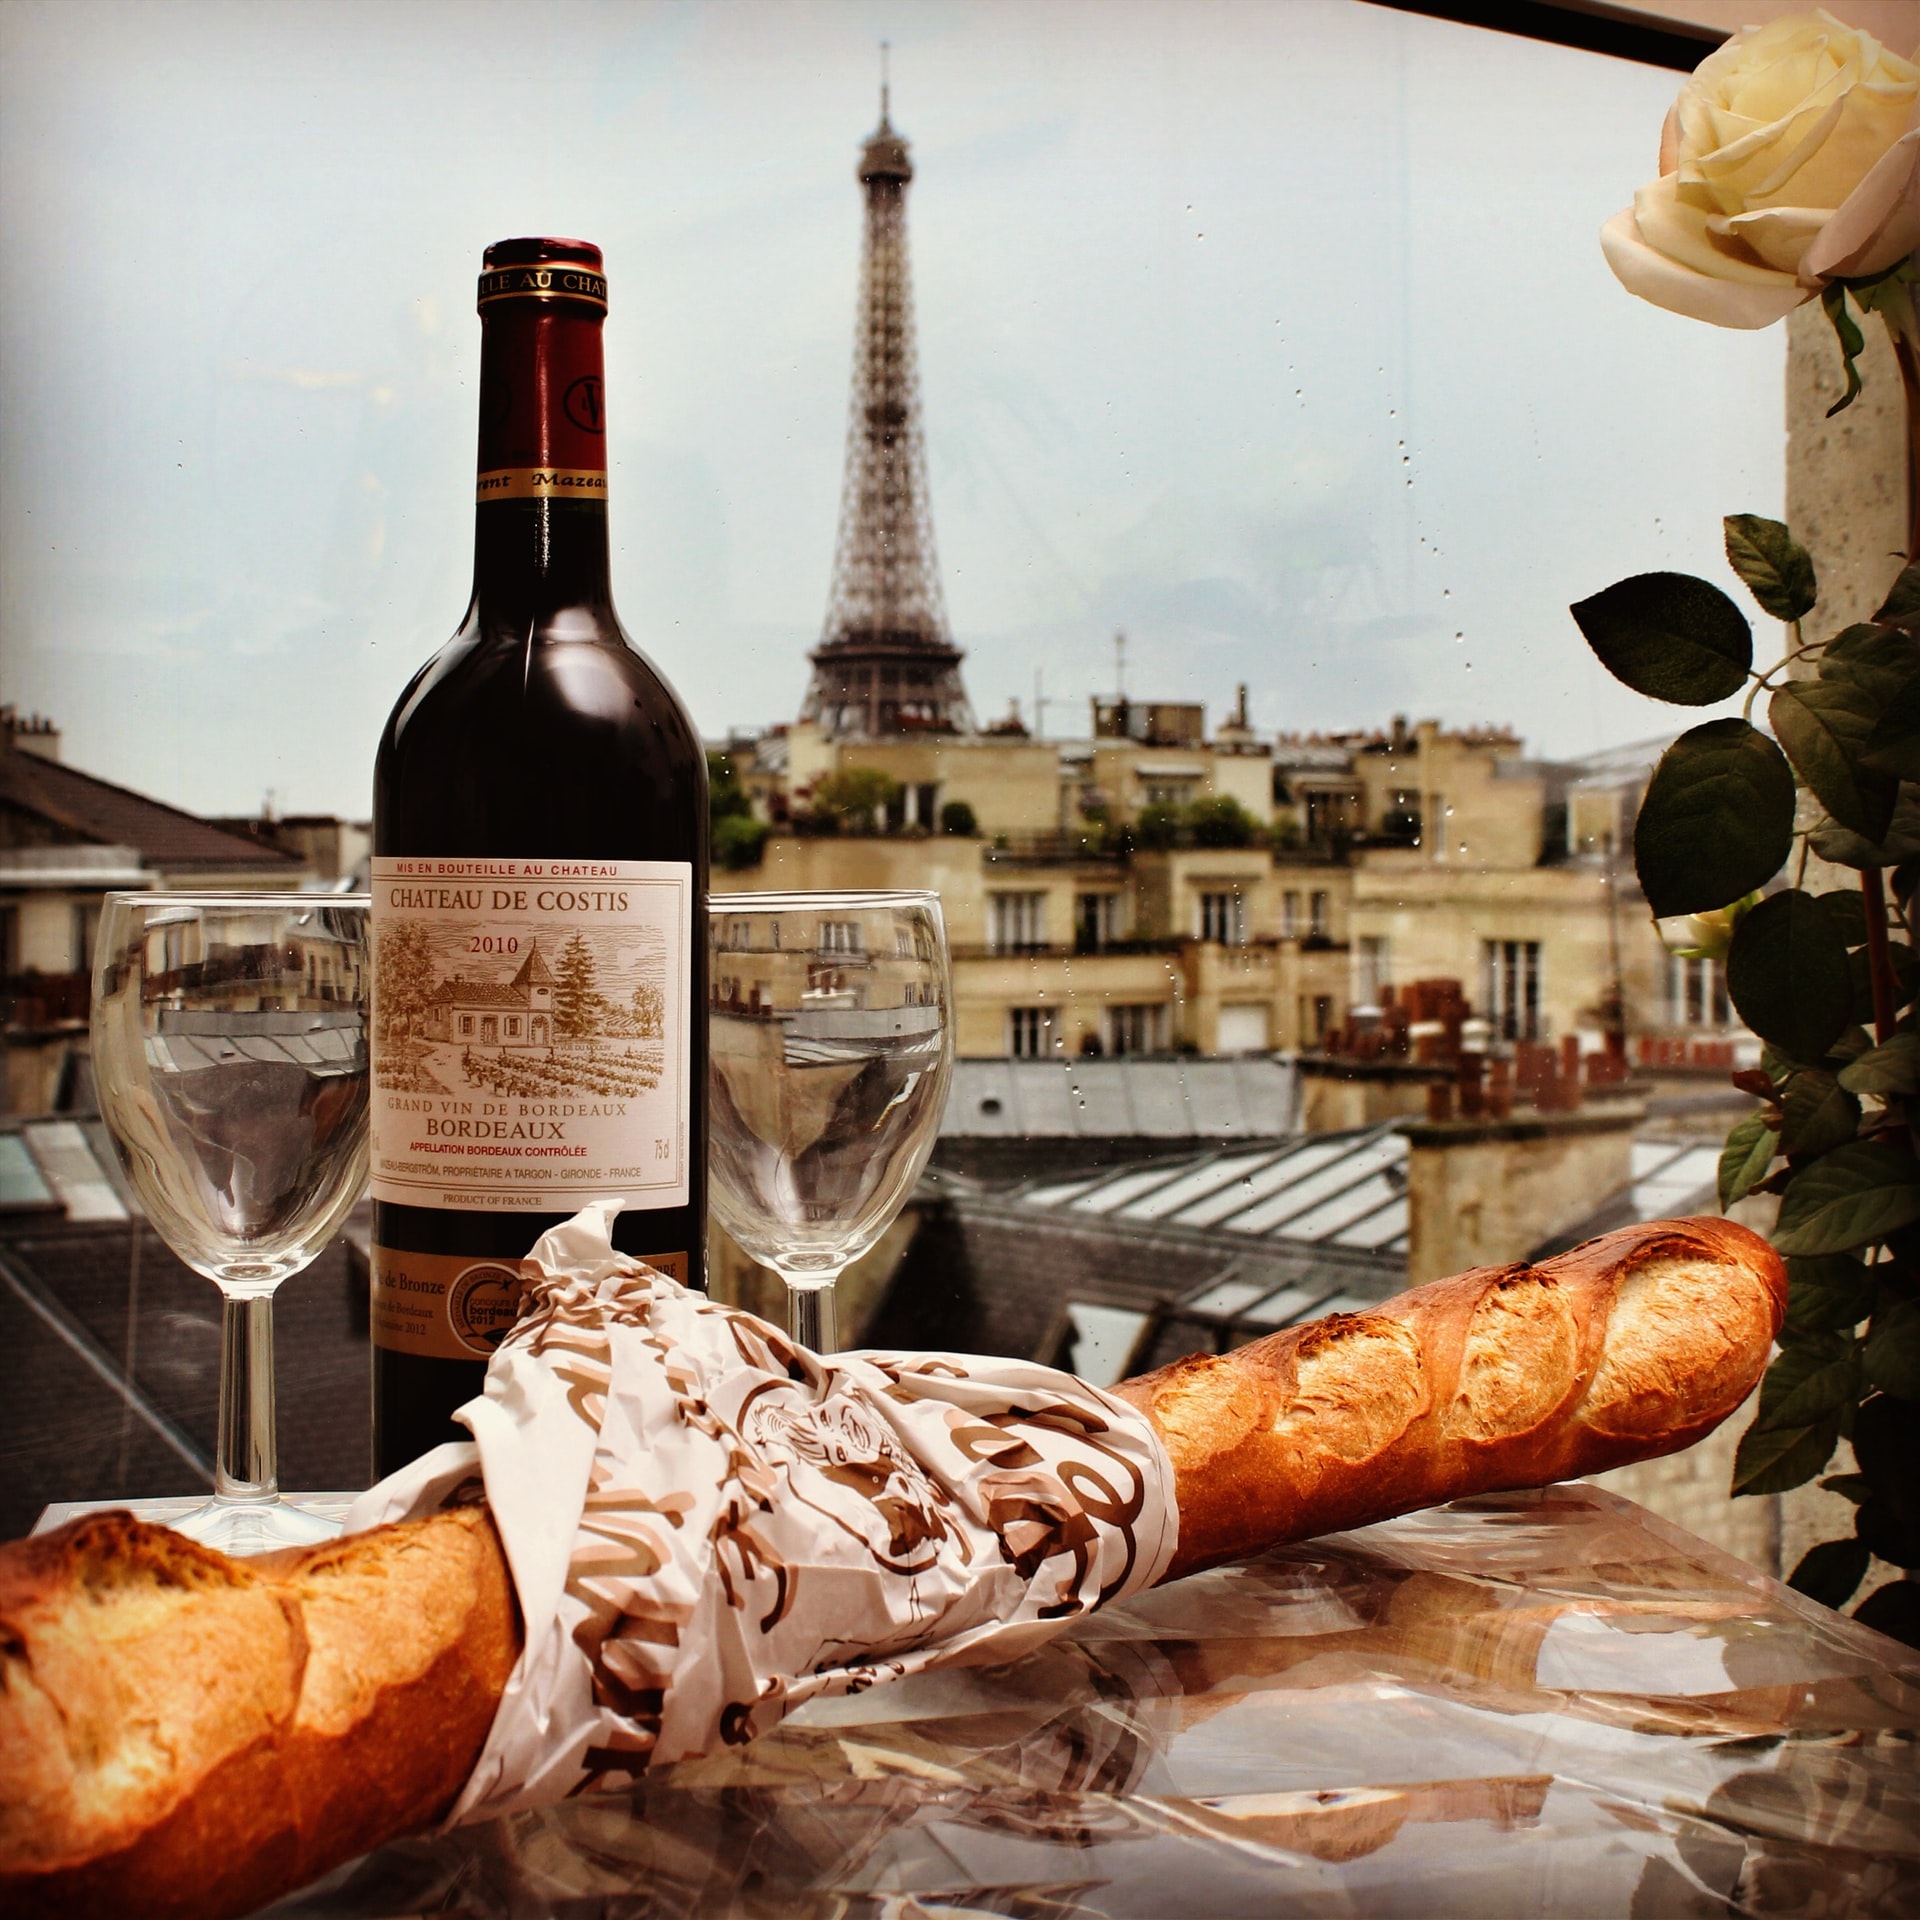 Romantic meal for couples with the Eiffel Tower in the background